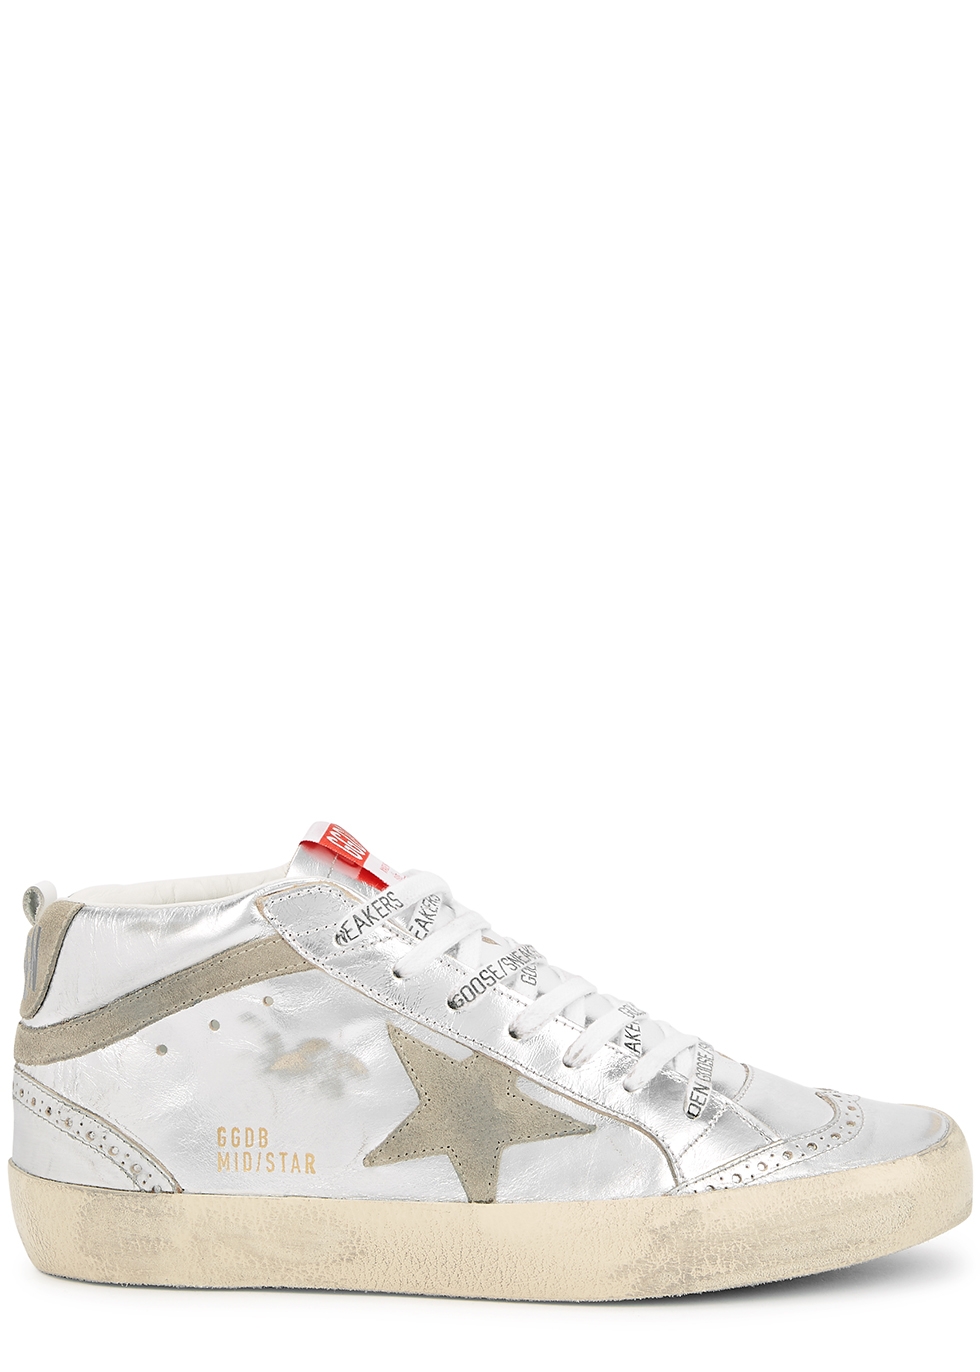 Mid Star silver distressed leather sneakers